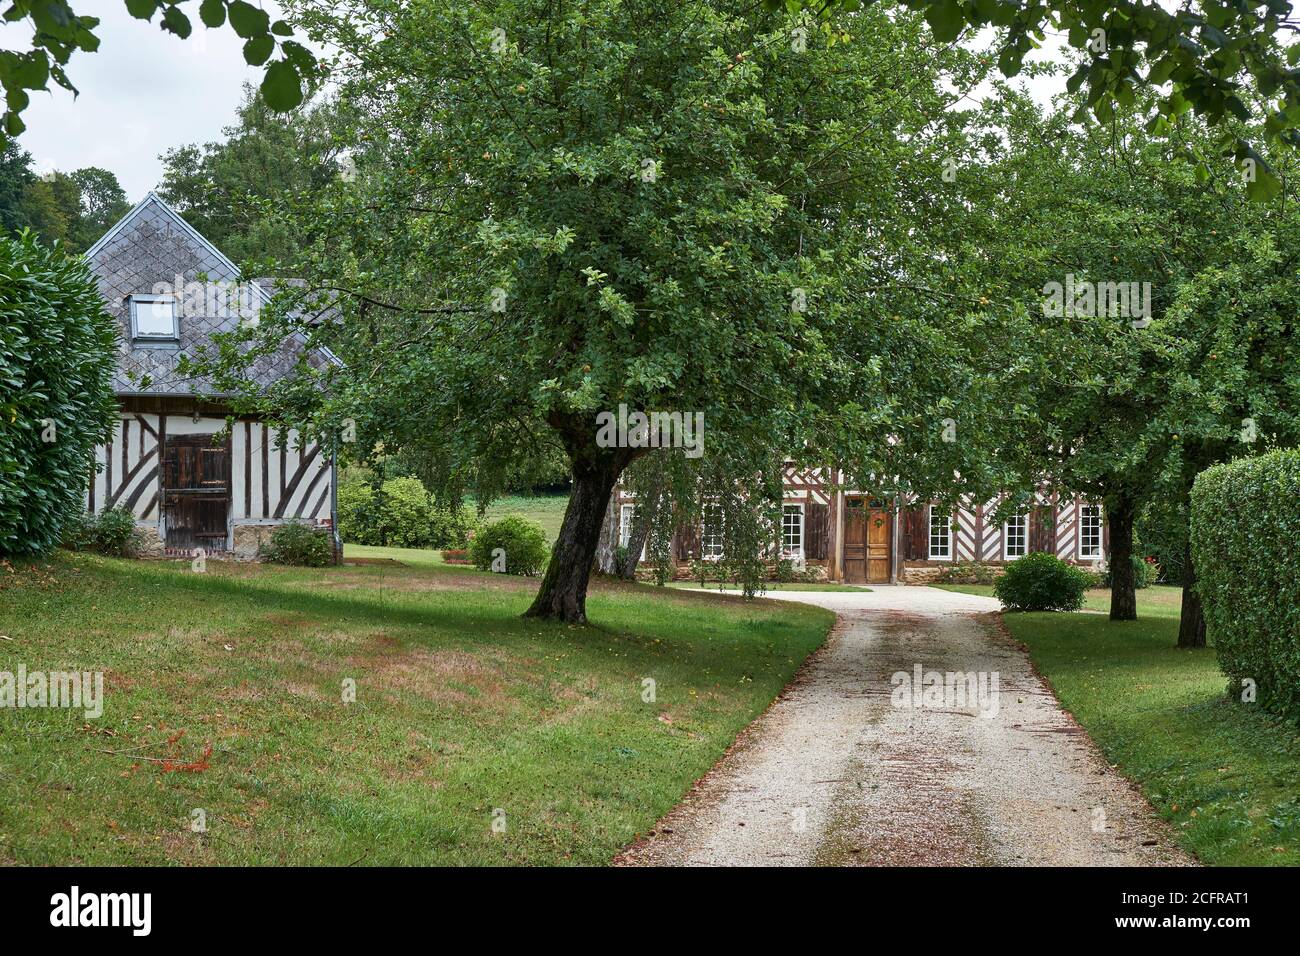 path and driveway flanked by apple trees leading to a half-timbered detached Norman property with freestanding outhouse. Stock Photo